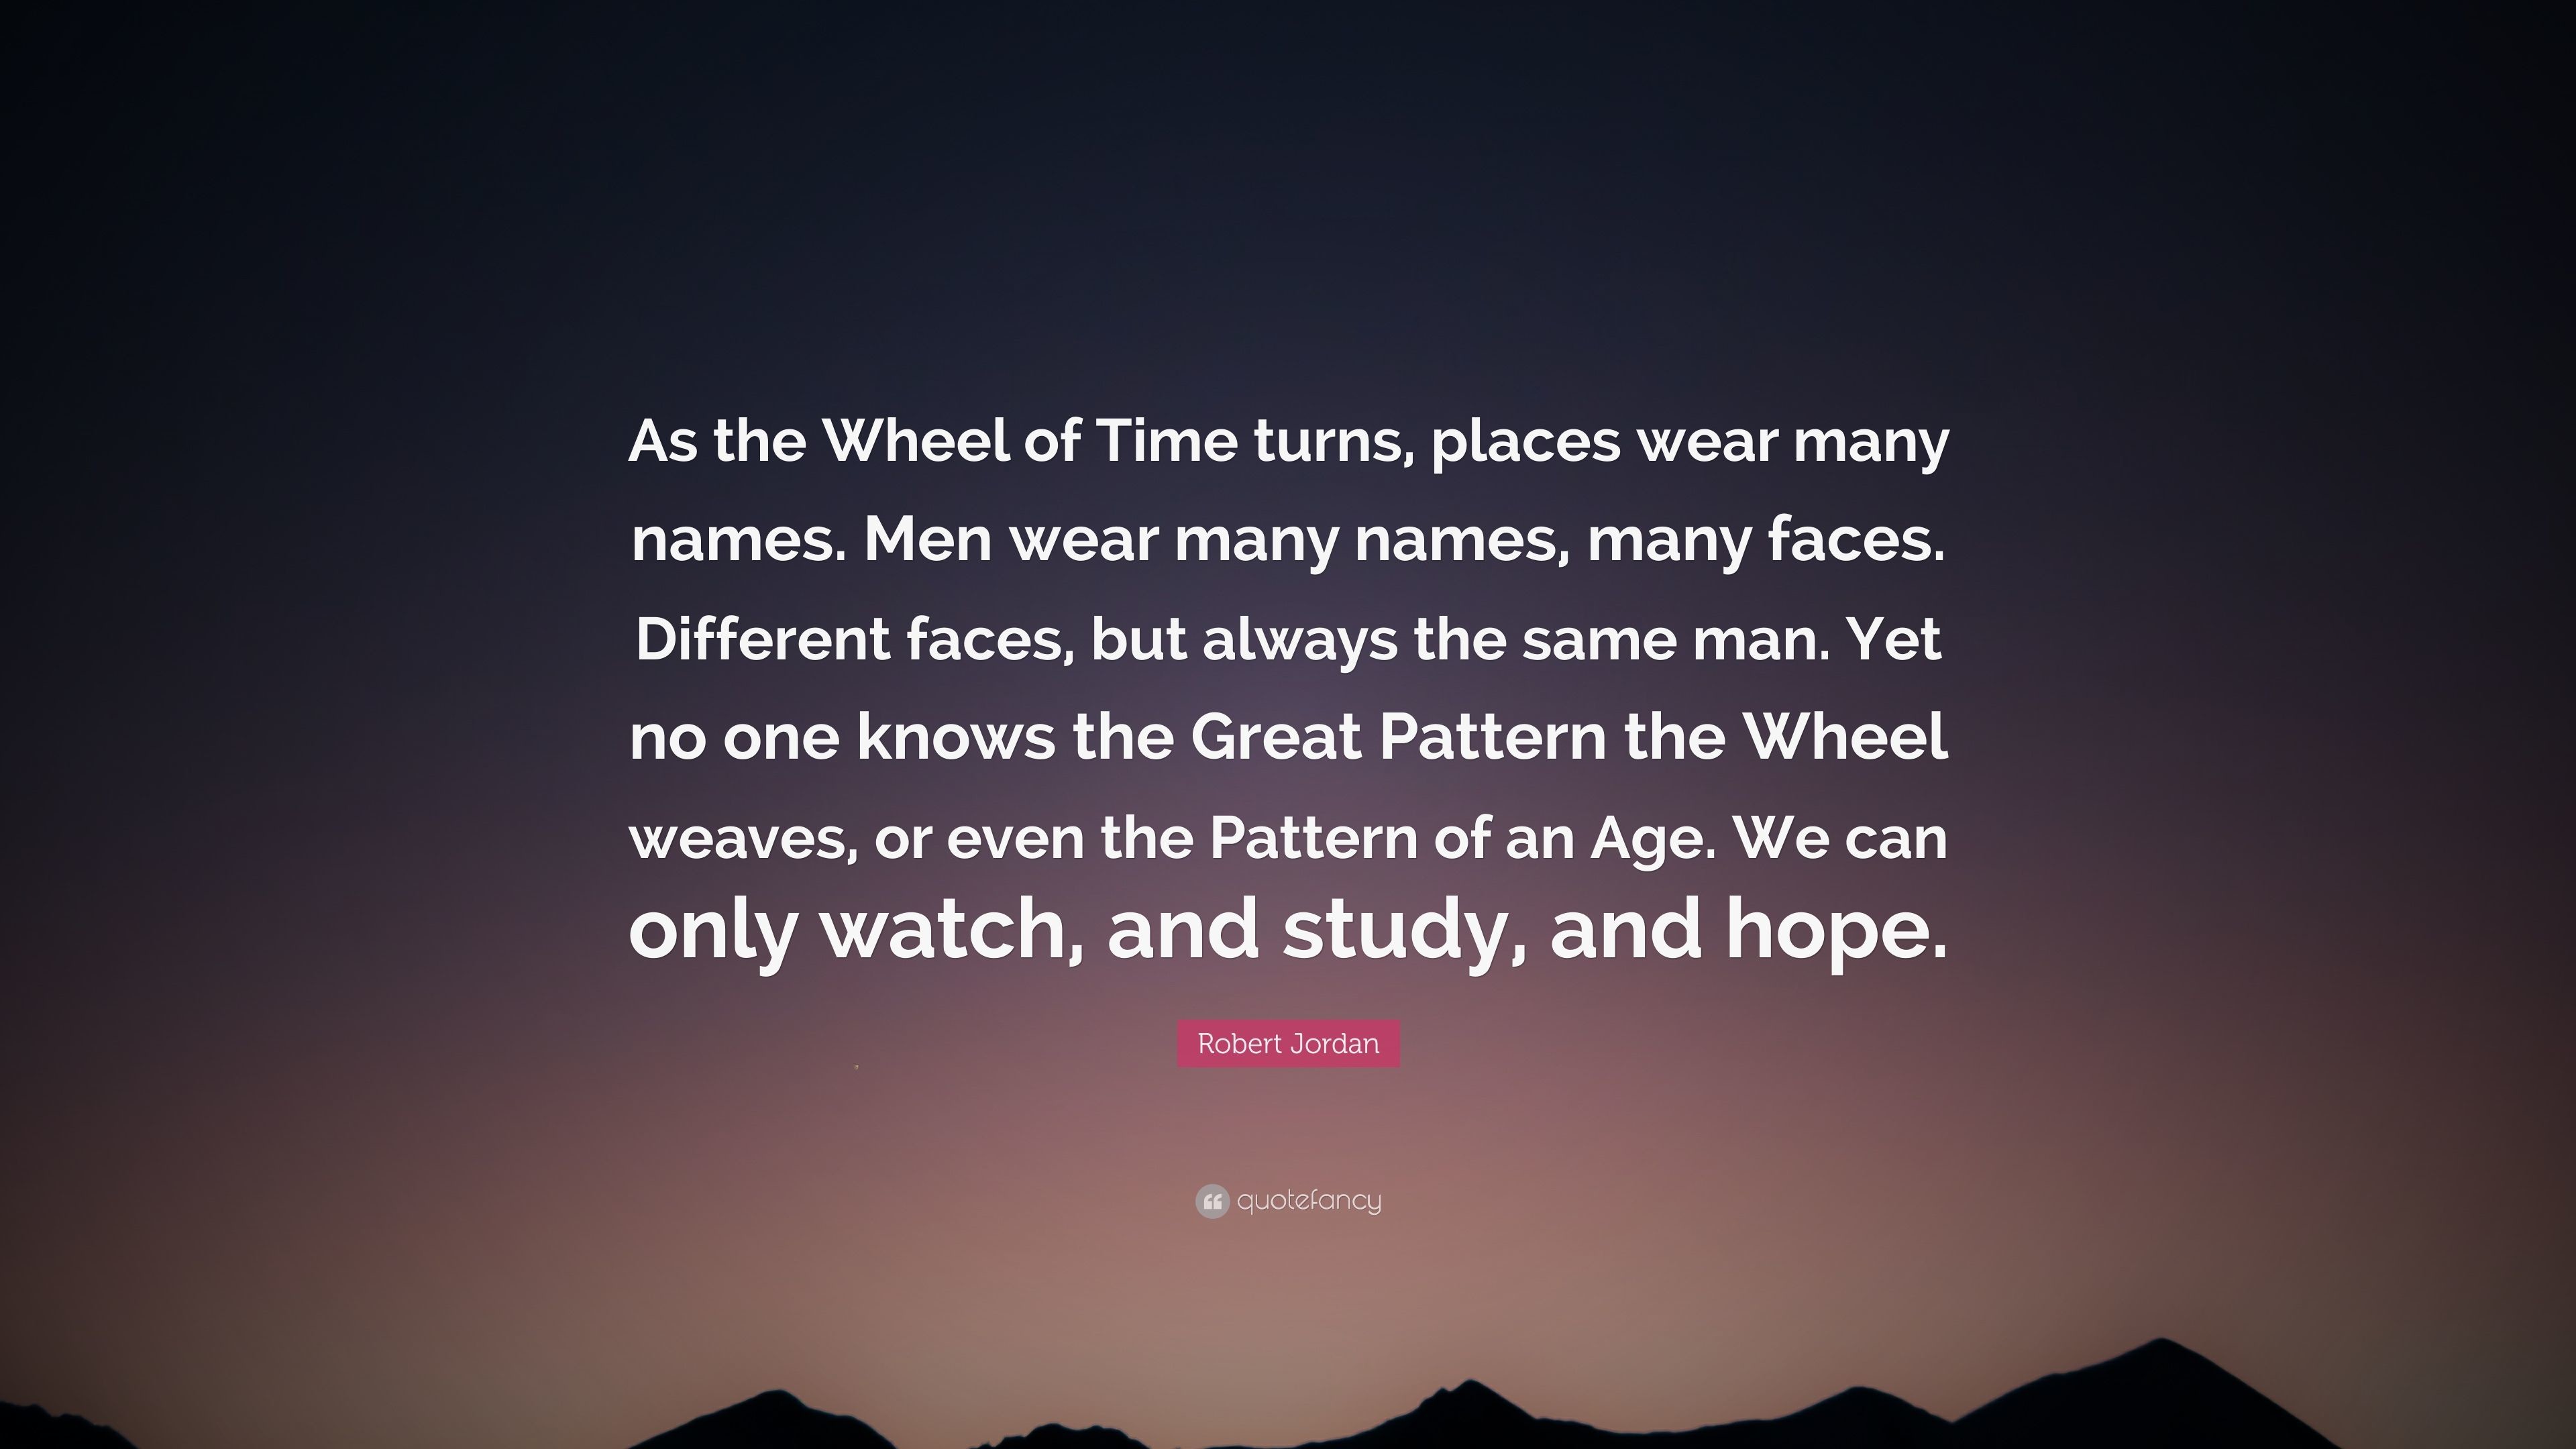 3840x2160 Robert Jordan Quote: “As the Wheel of Time turns, places wear many names